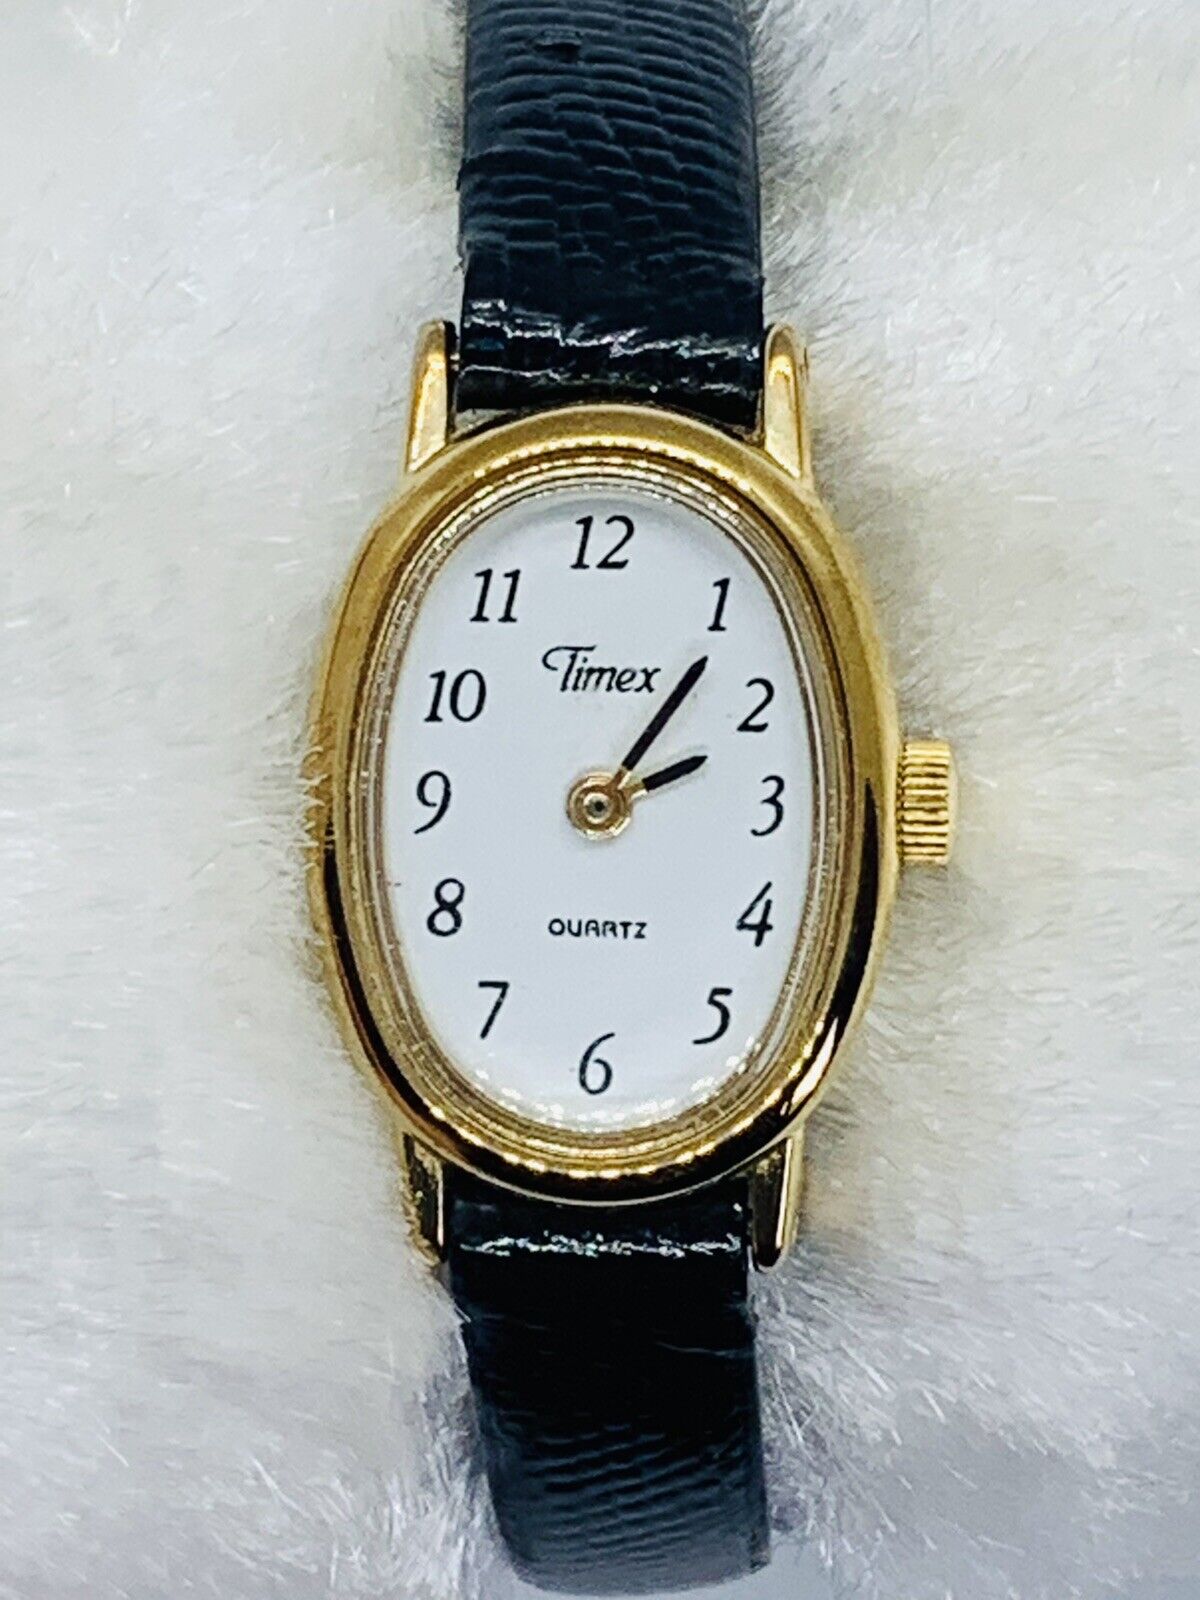 Vintage TIMEX Gold Oval Face Quartz Watch WORKS KEEPS GOOD TIME New Battery